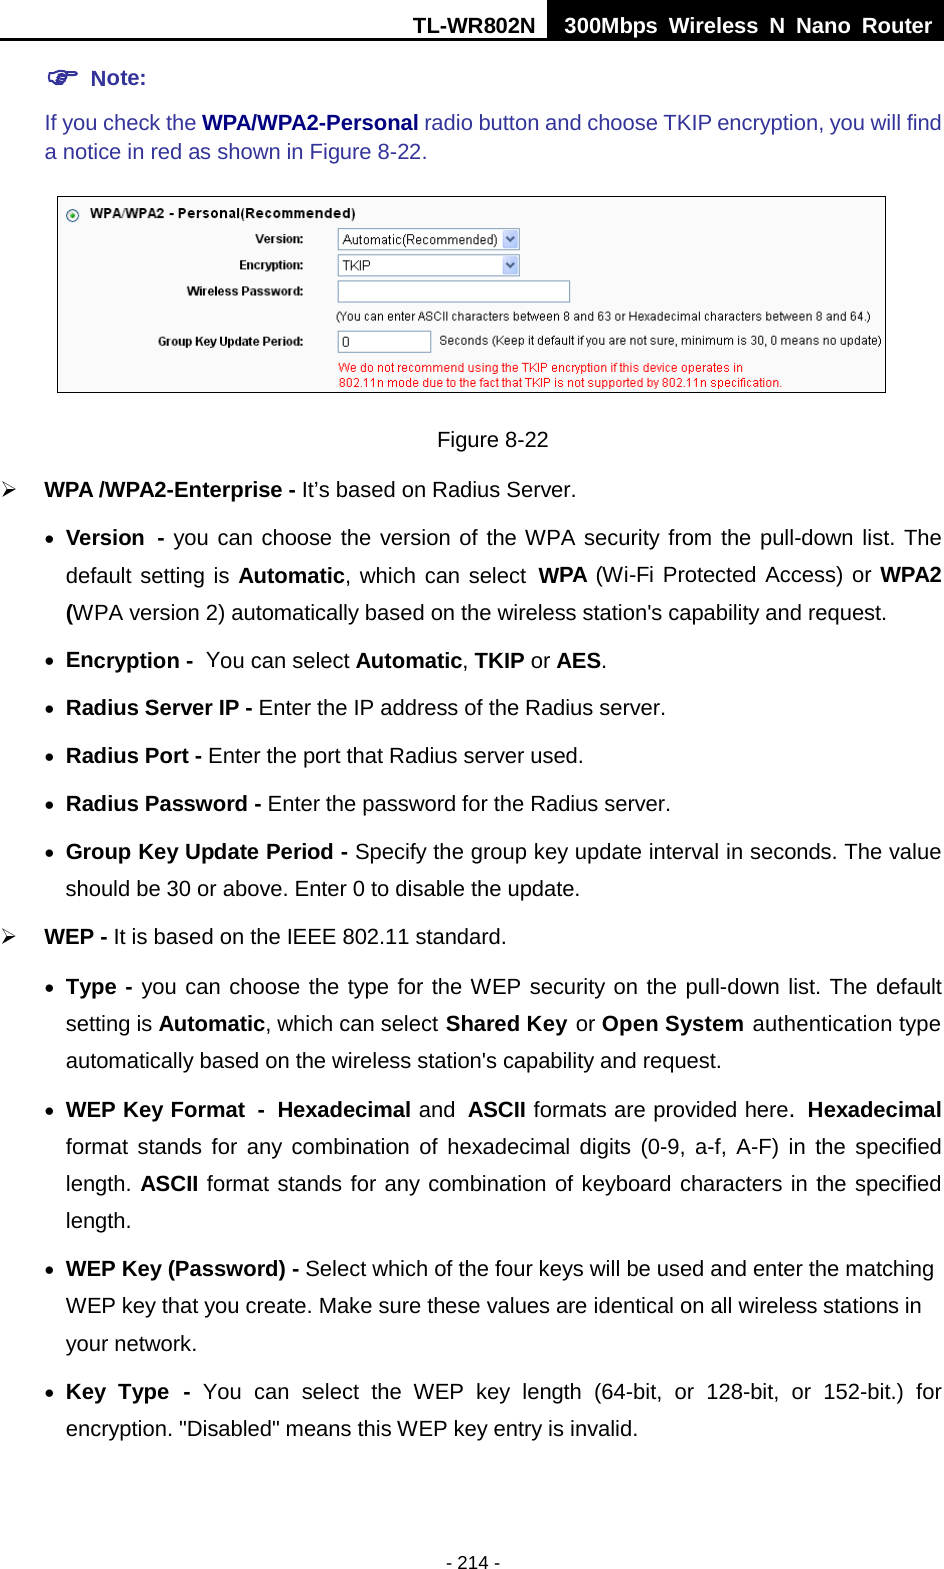 TL-WR802N  300Mbps Wireless N Nano Router   Note:   If you check the WPA/WPA2-Personal radio button and choose TKIP encryption, you will find a notice in red as shown in Figure 8-22.  Figure 8-22  WPA /WPA2-Enterprise - It’s based on Radius Server. • Version - you can choose the version of the WPA security from the pull-down list. The default setting is Automatic, which can select WPA (Wi-Fi Protected Access) or WPA2 (WPA version 2) automatically based on the wireless station&apos;s capability and request. • Encryption - You can select Automatic, TKIP or AES. • Radius Server IP - Enter the IP address of the Radius server. • Radius Port - Enter the port that Radius server used. • Radius Password - Enter the password for the Radius server. • Group Key Update Period - Specify the group key update interval in seconds. The value should be 30 or above. Enter 0 to disable the update.  WEP - It is based on the IEEE 802.11 standard.   • Type - you can choose the type for the WEP security on the pull-down list. The default setting is Automatic, which can select Shared Key or Open System authentication type automatically based on the wireless station&apos;s capability and request. • WEP Key Format - Hexadecimal and ASCII formats are provided here. Hexadecimal format stands for any combination of hexadecimal digits (0-9, a-f, A-F) in the specified length. ASCII format stands for any combination of keyboard characters in the specified length.   • WEP Key (Password) - Select which of the four keys will be used and enter the matching WEP key that you create. Make sure these values are identical on all wireless stations in your network.   • Key Type - You can select the WEP key length (64-bit, or 128-bit, or 152-bit.) for encryption. &quot;Disabled&quot; means this WEP key entry is invalid. - 214 - 